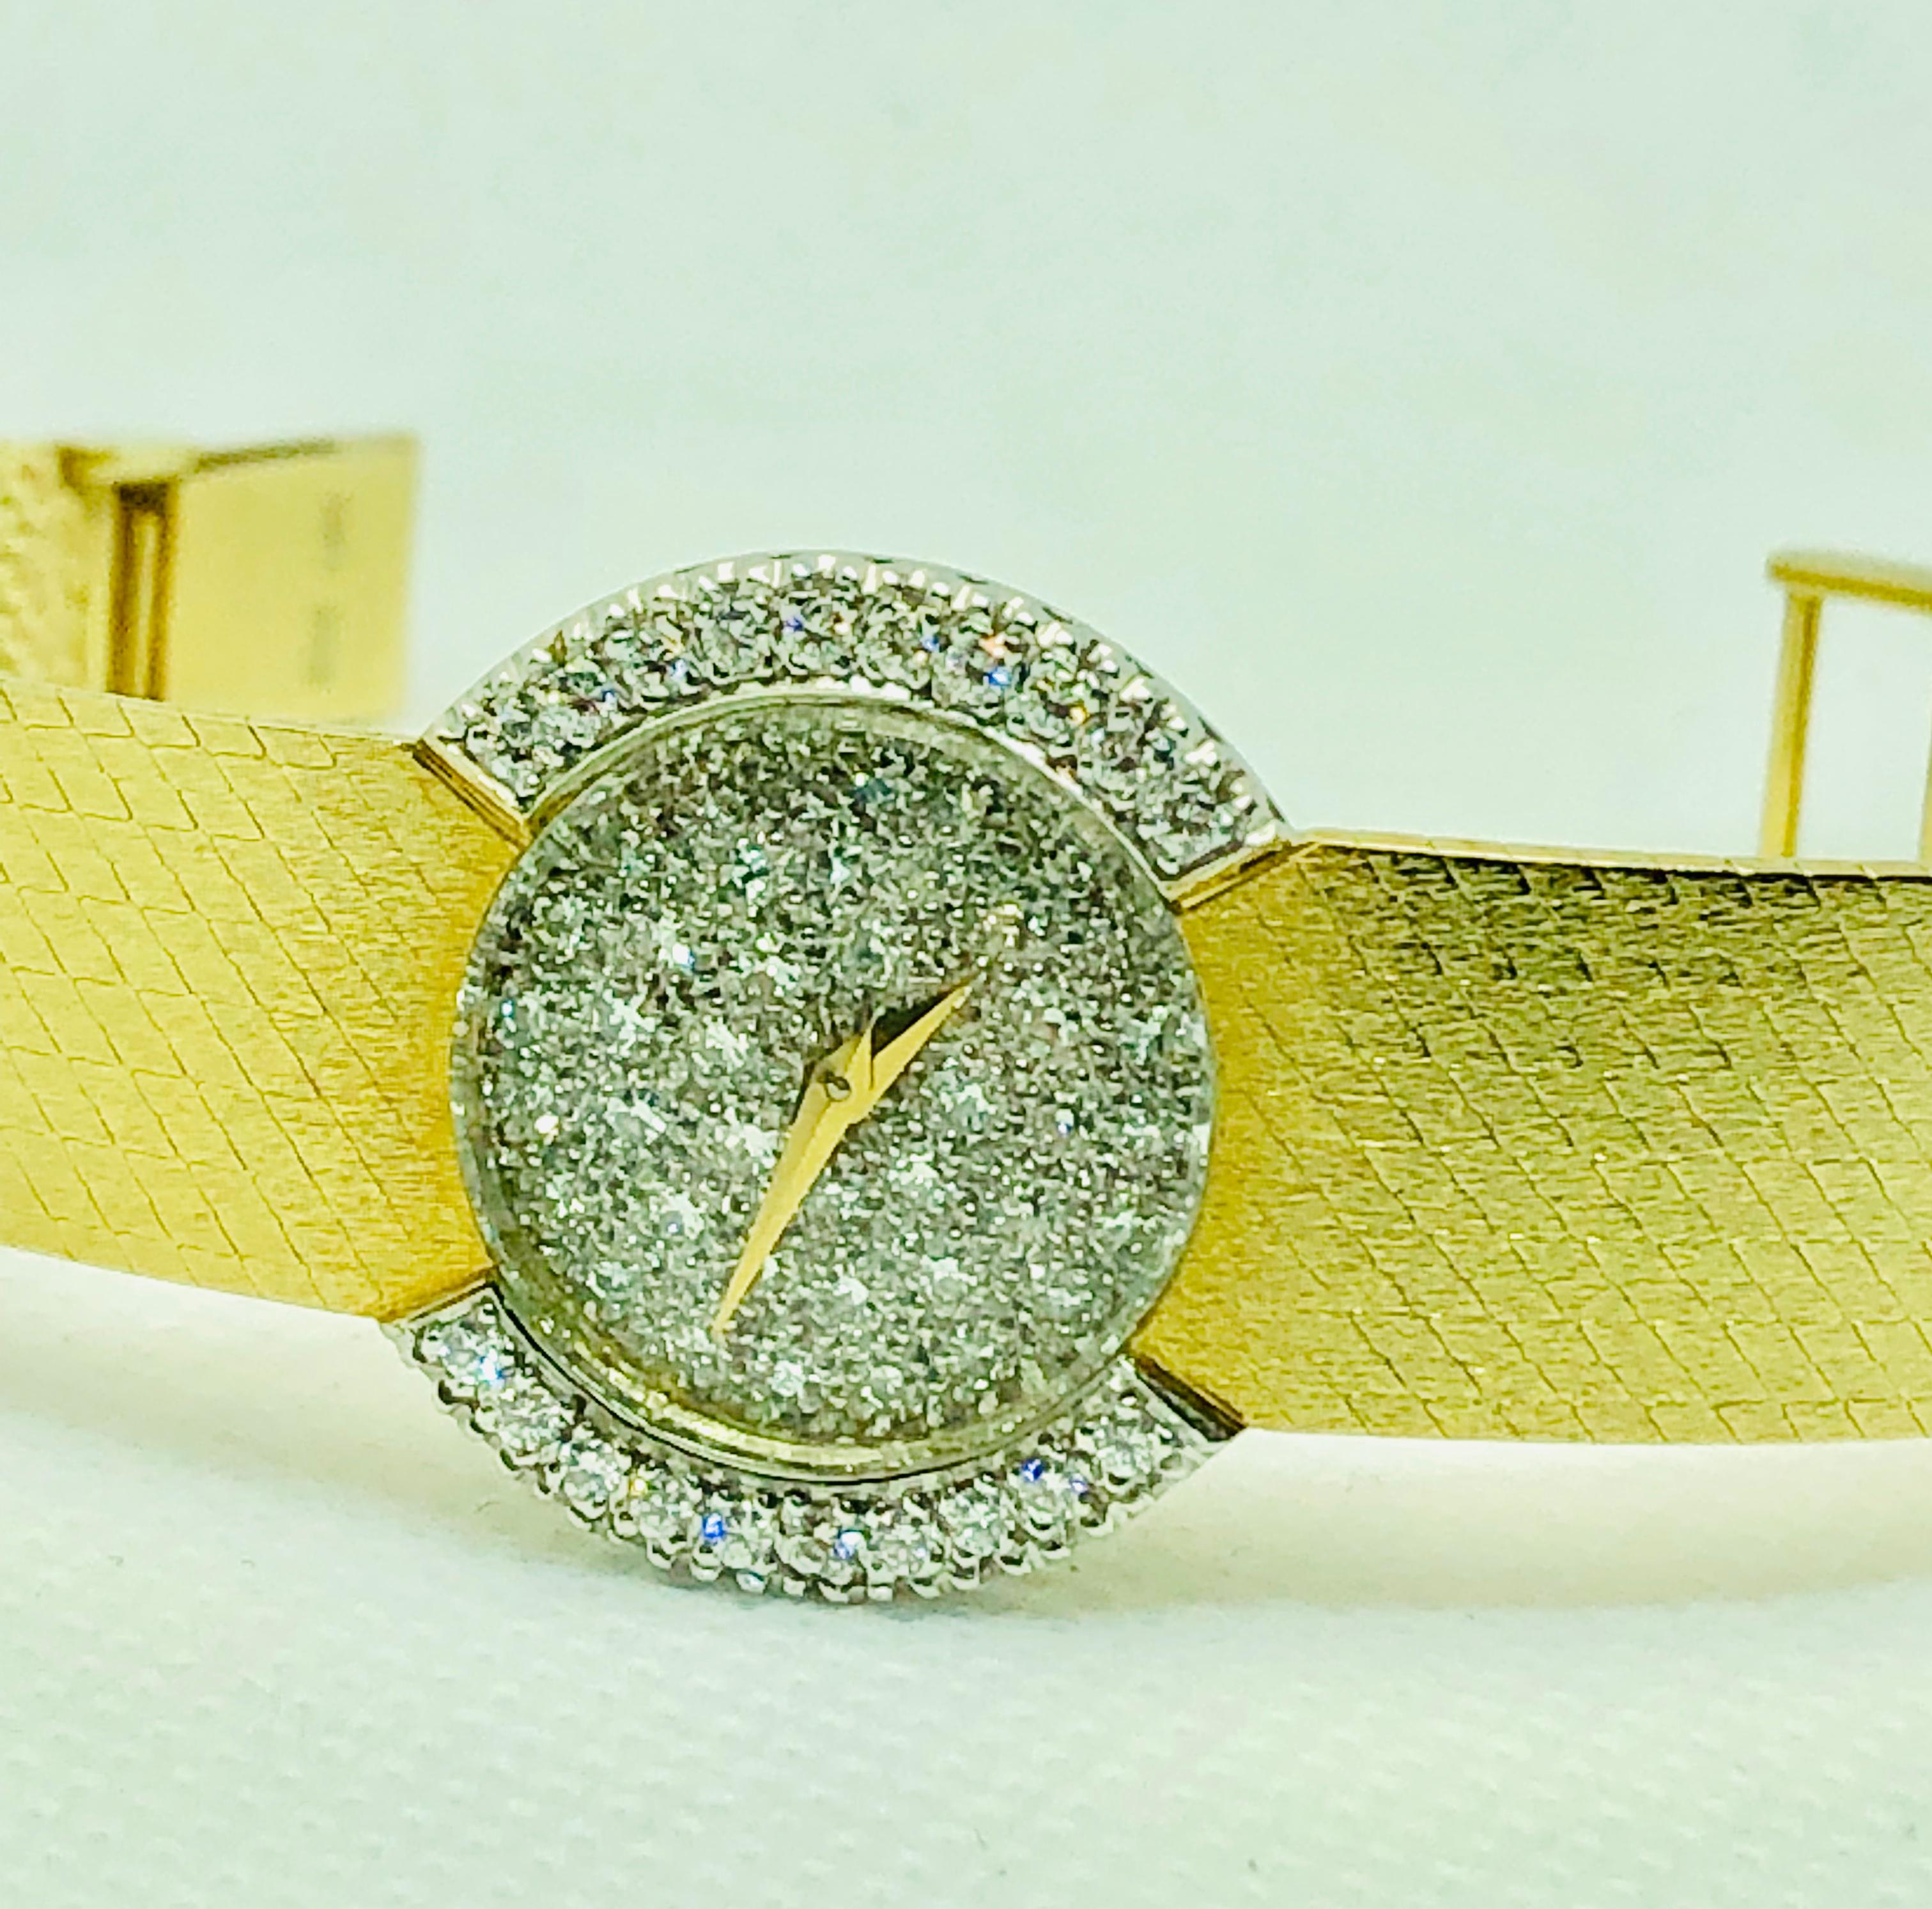 Absolutely Stunning Baume & Mercier Ladies Watch. This vintage piece features 42 single cut diamonds on the dial that are estimated to weigh 0.42 carats. In addition, there are 20 Brilliant Round Cut diamonds on the bezel that are estimated to weigh